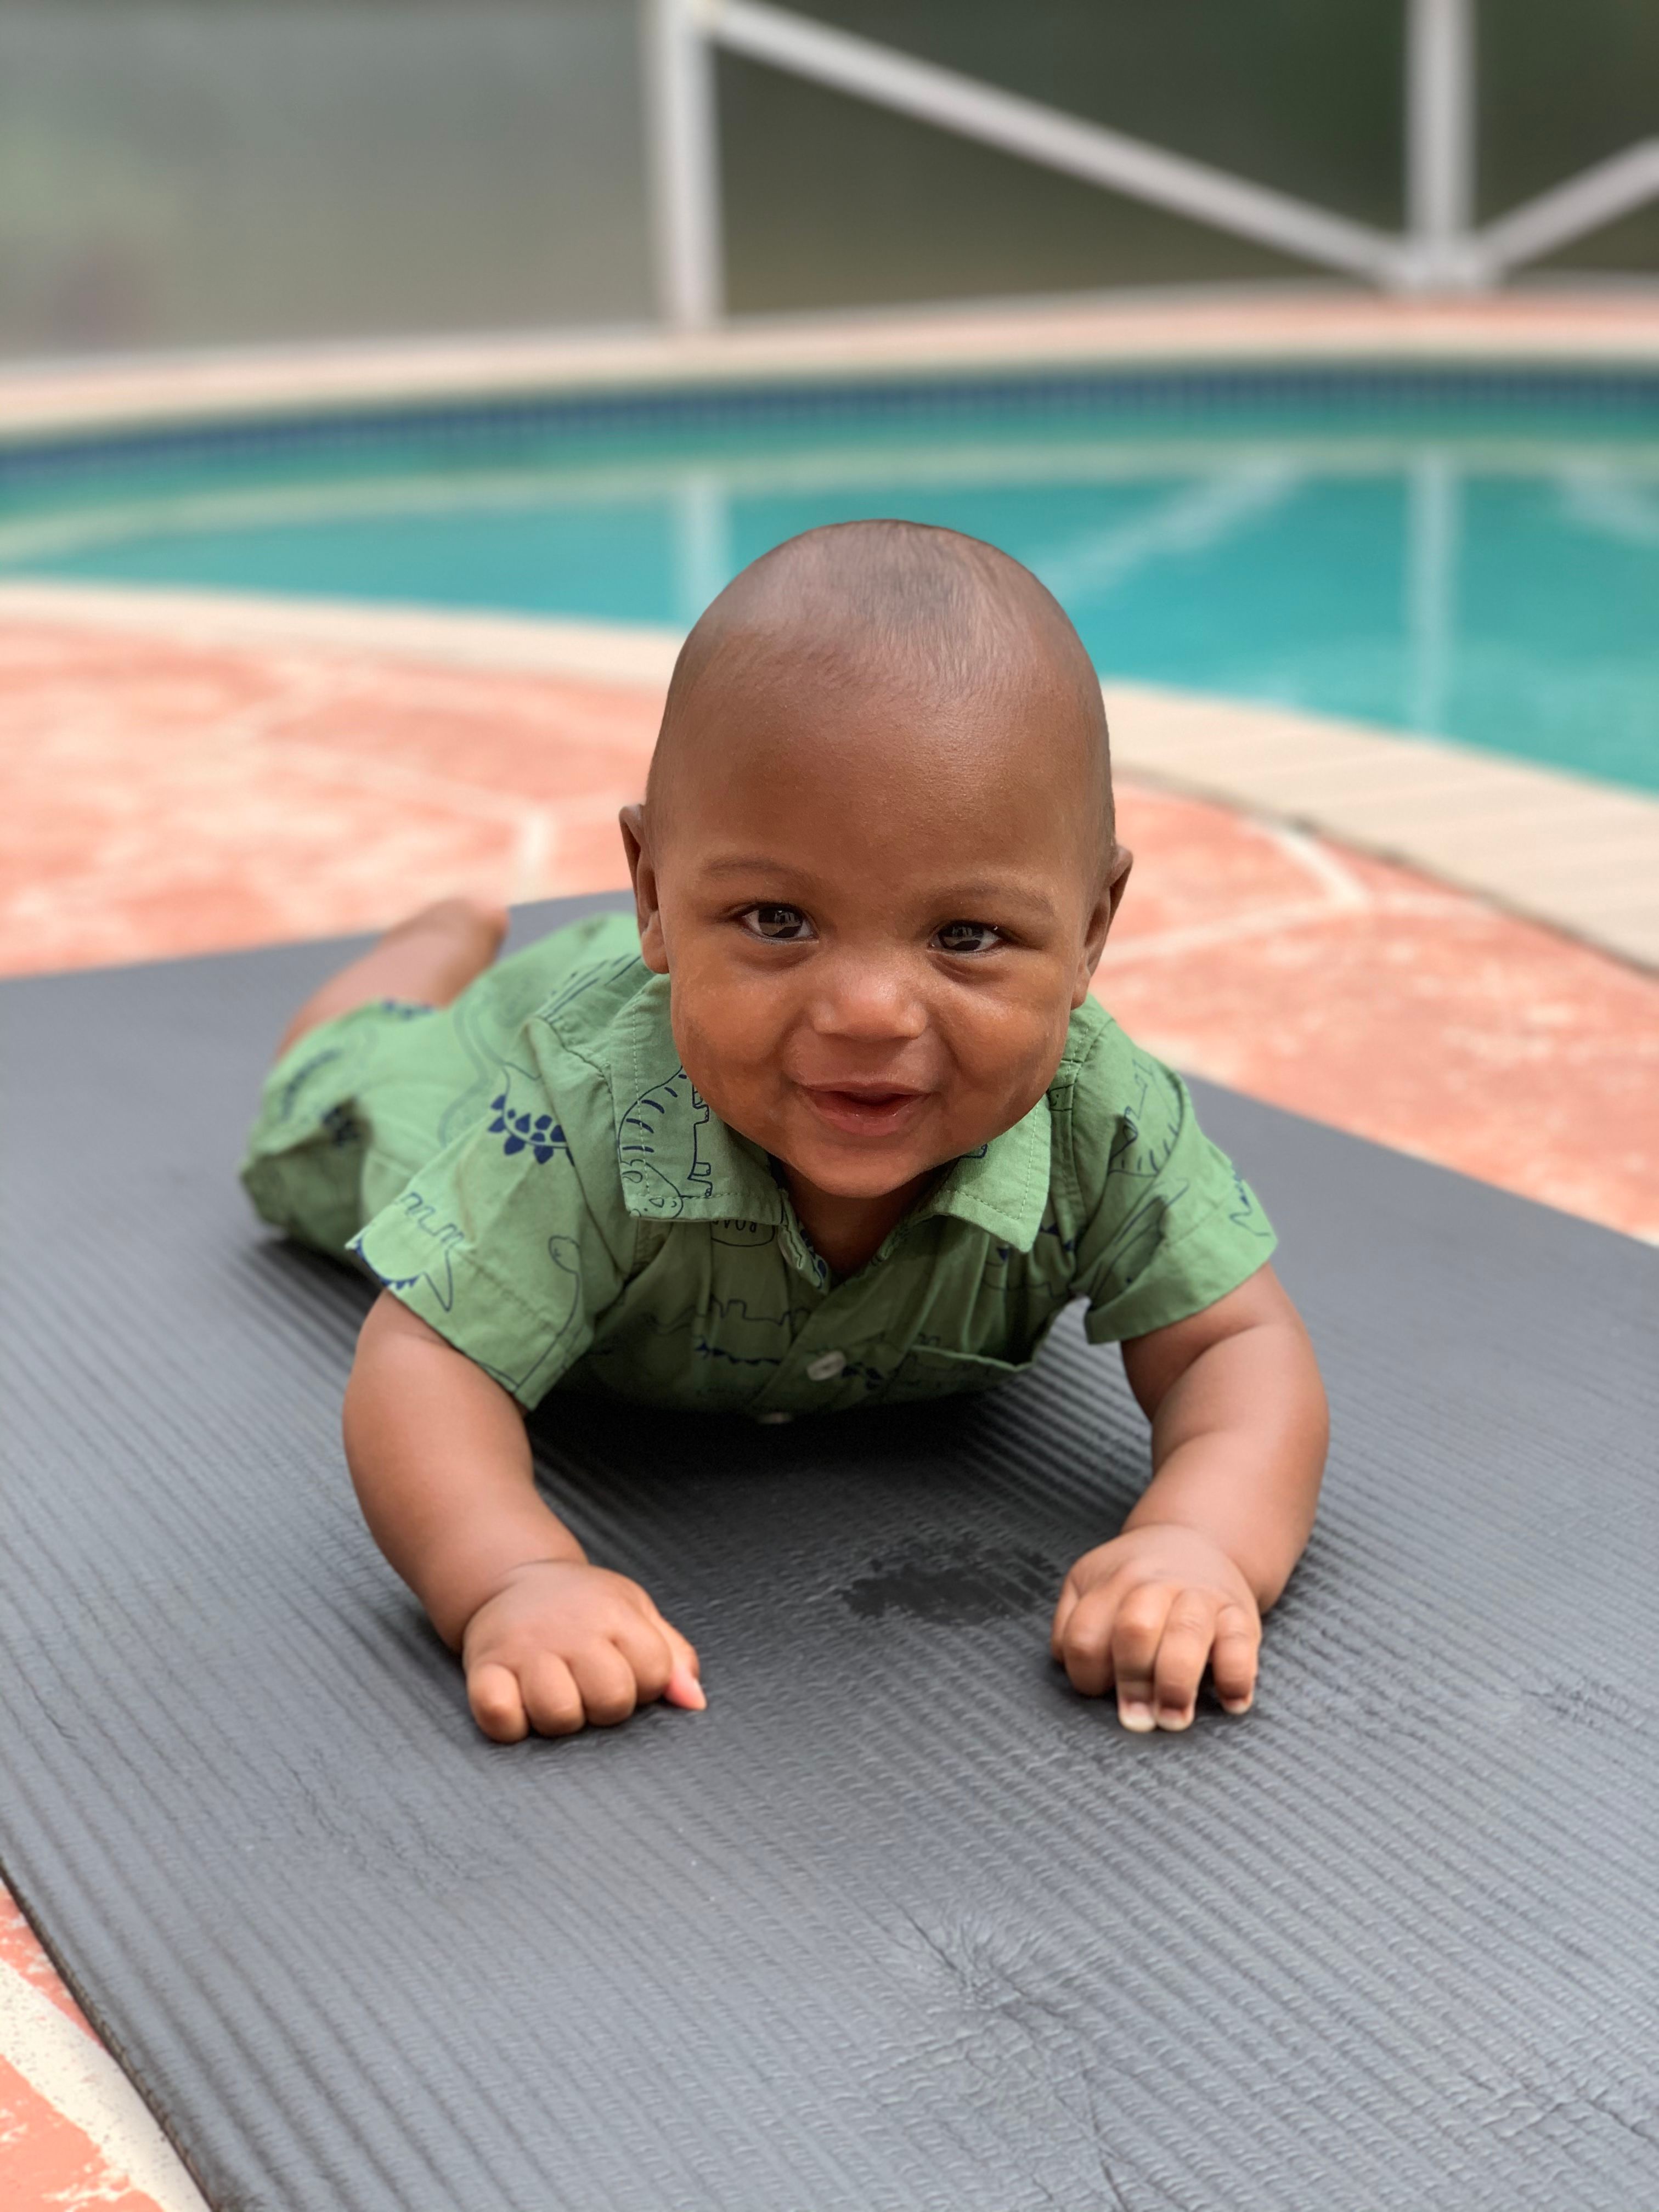 This is my baby brother junior by the pool.